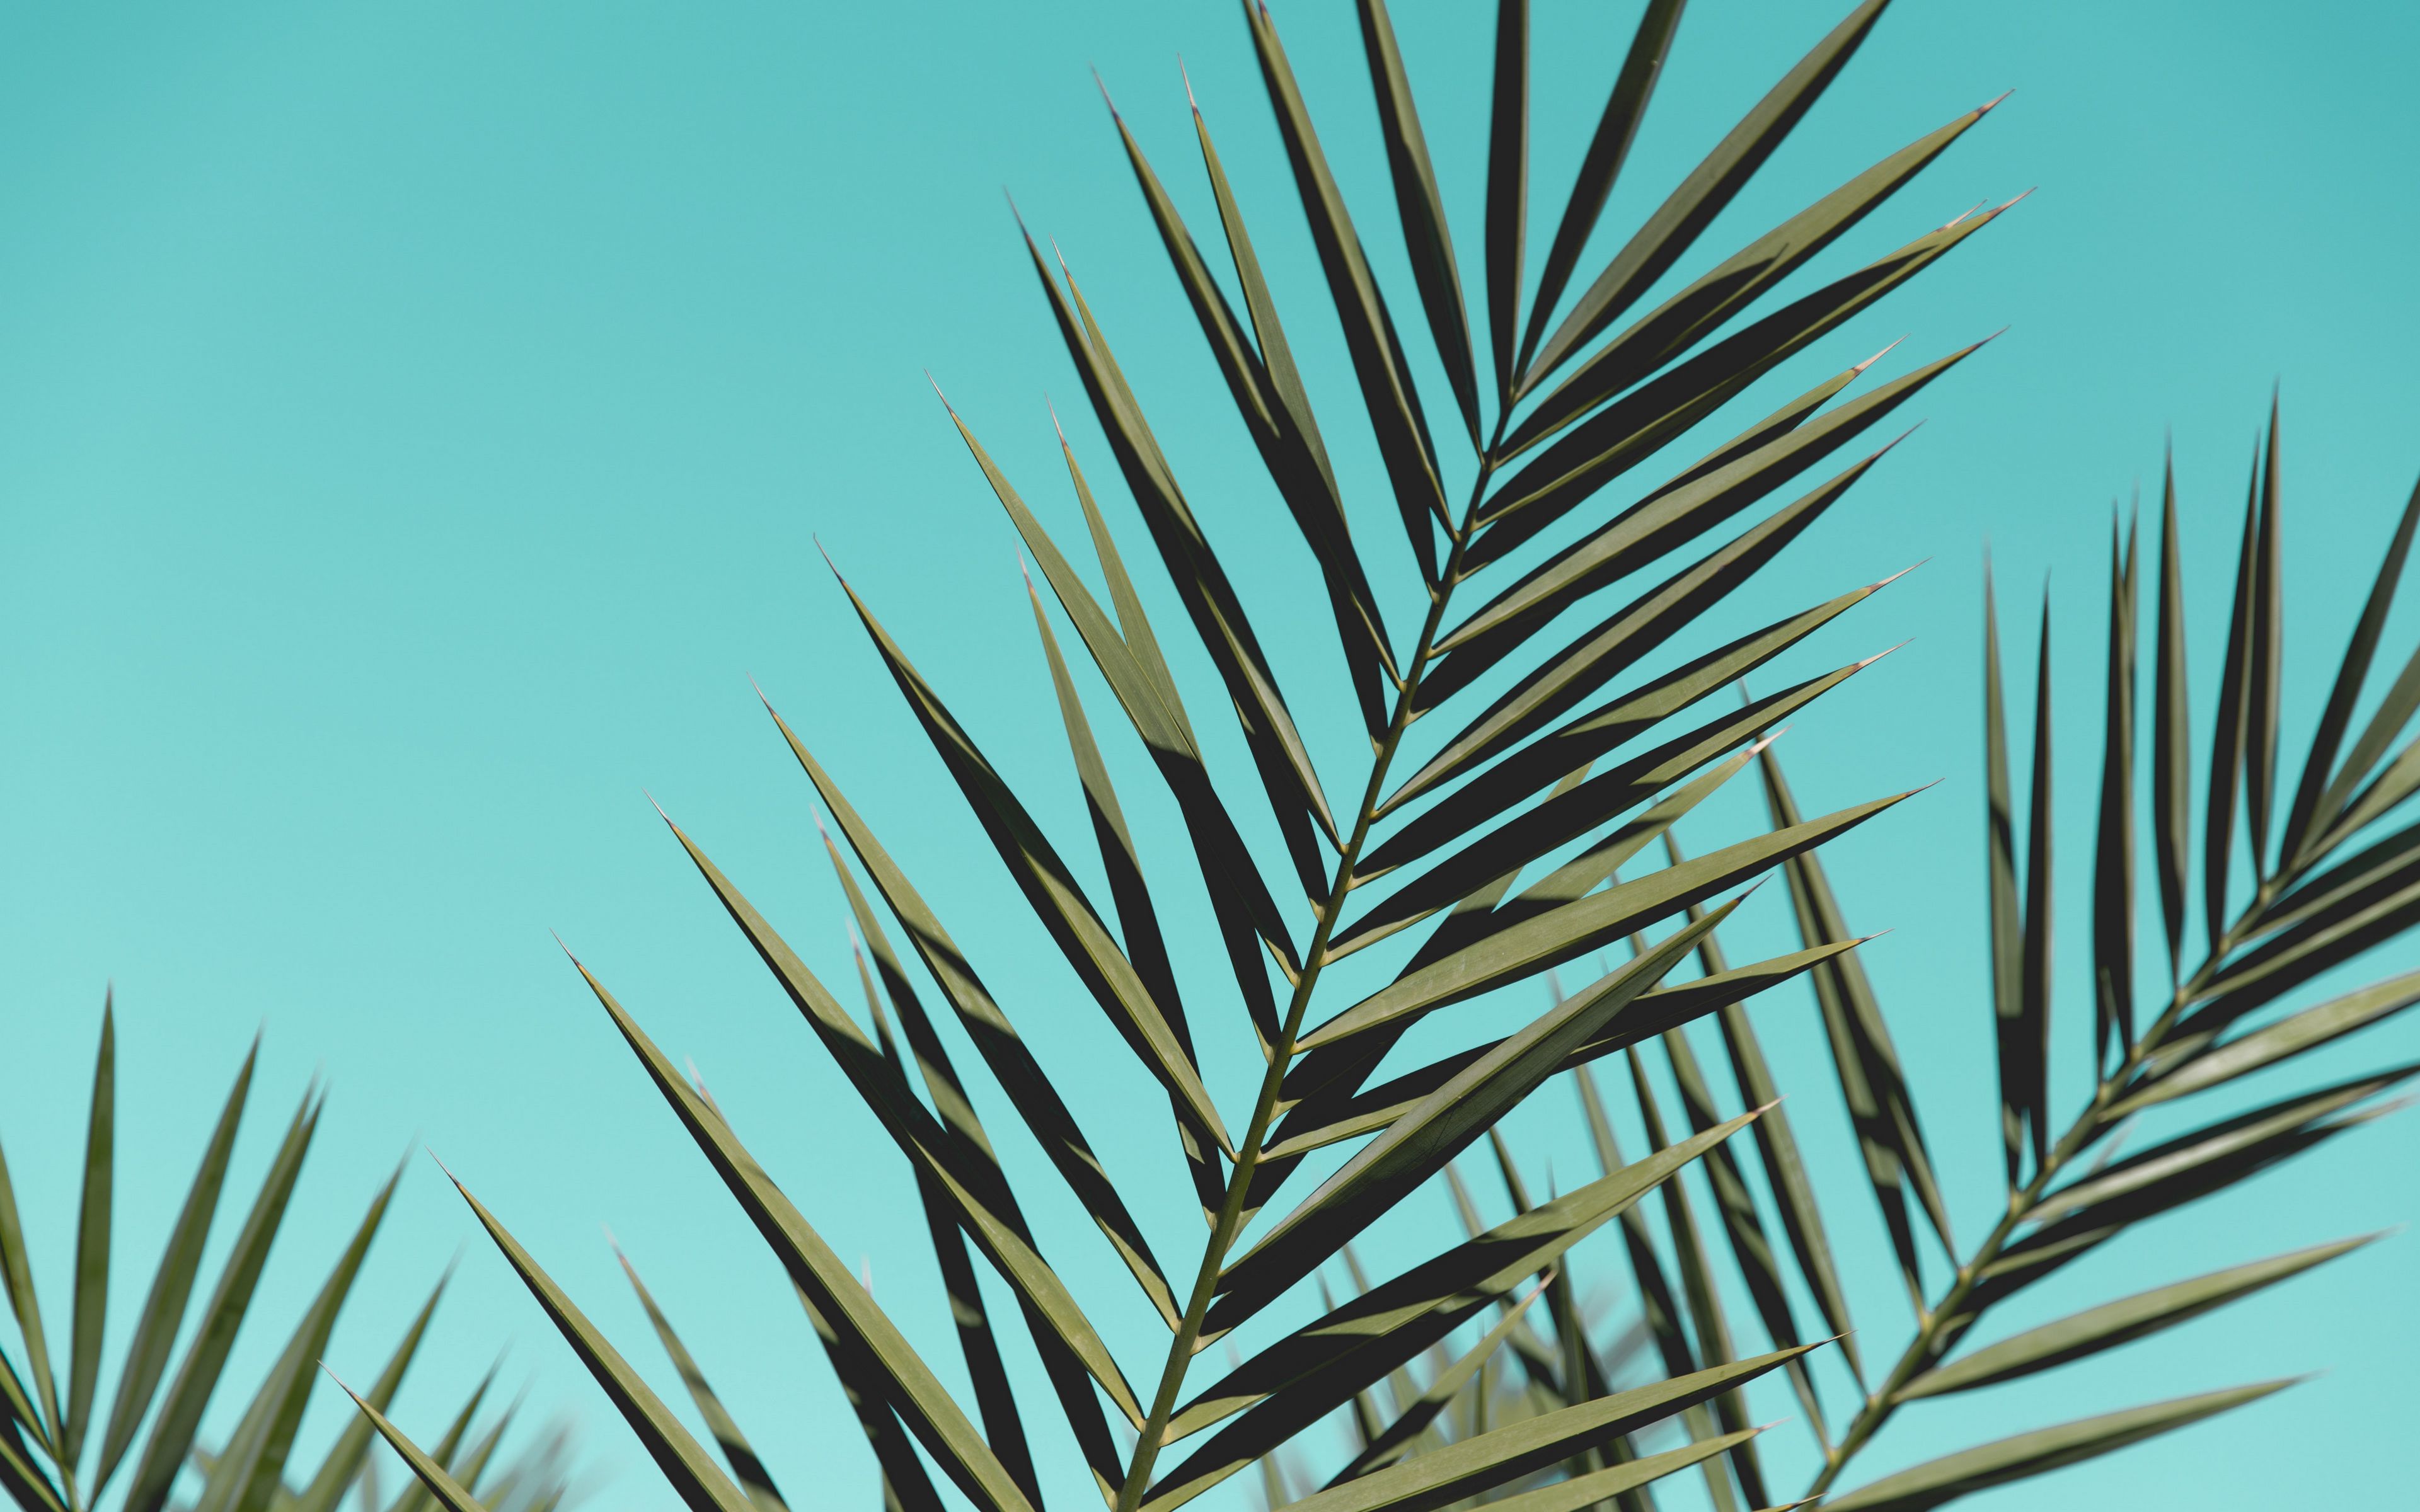 Download wallpaper 3840x2400 palm, branches, leaves, sky, plant 4k ...